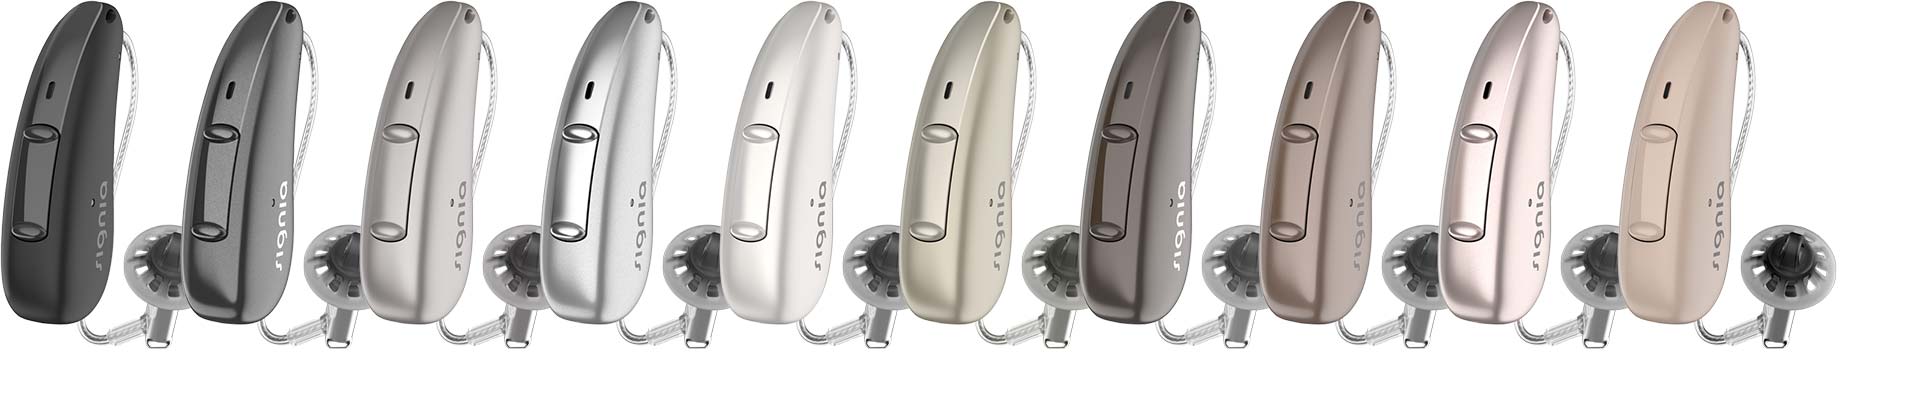 Pure Charge&Go AX hearing aids change the way you hear the world | Signia